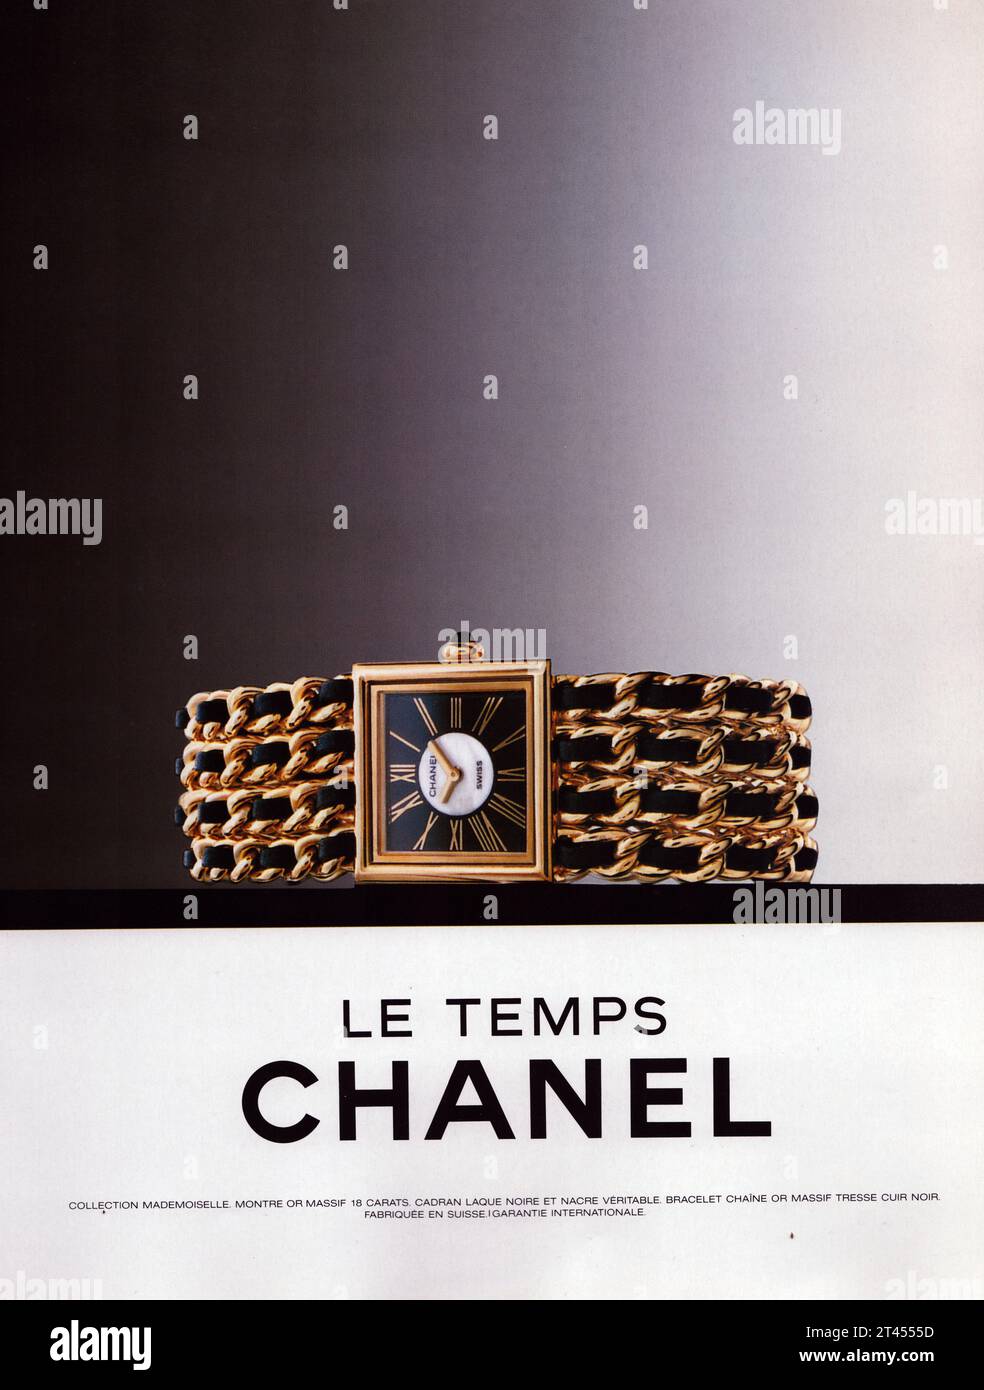 Chanel Le Temps gold watch Chanel black and gold bracelet watch advertisement Chanel ladies watch commercial Stock Photo